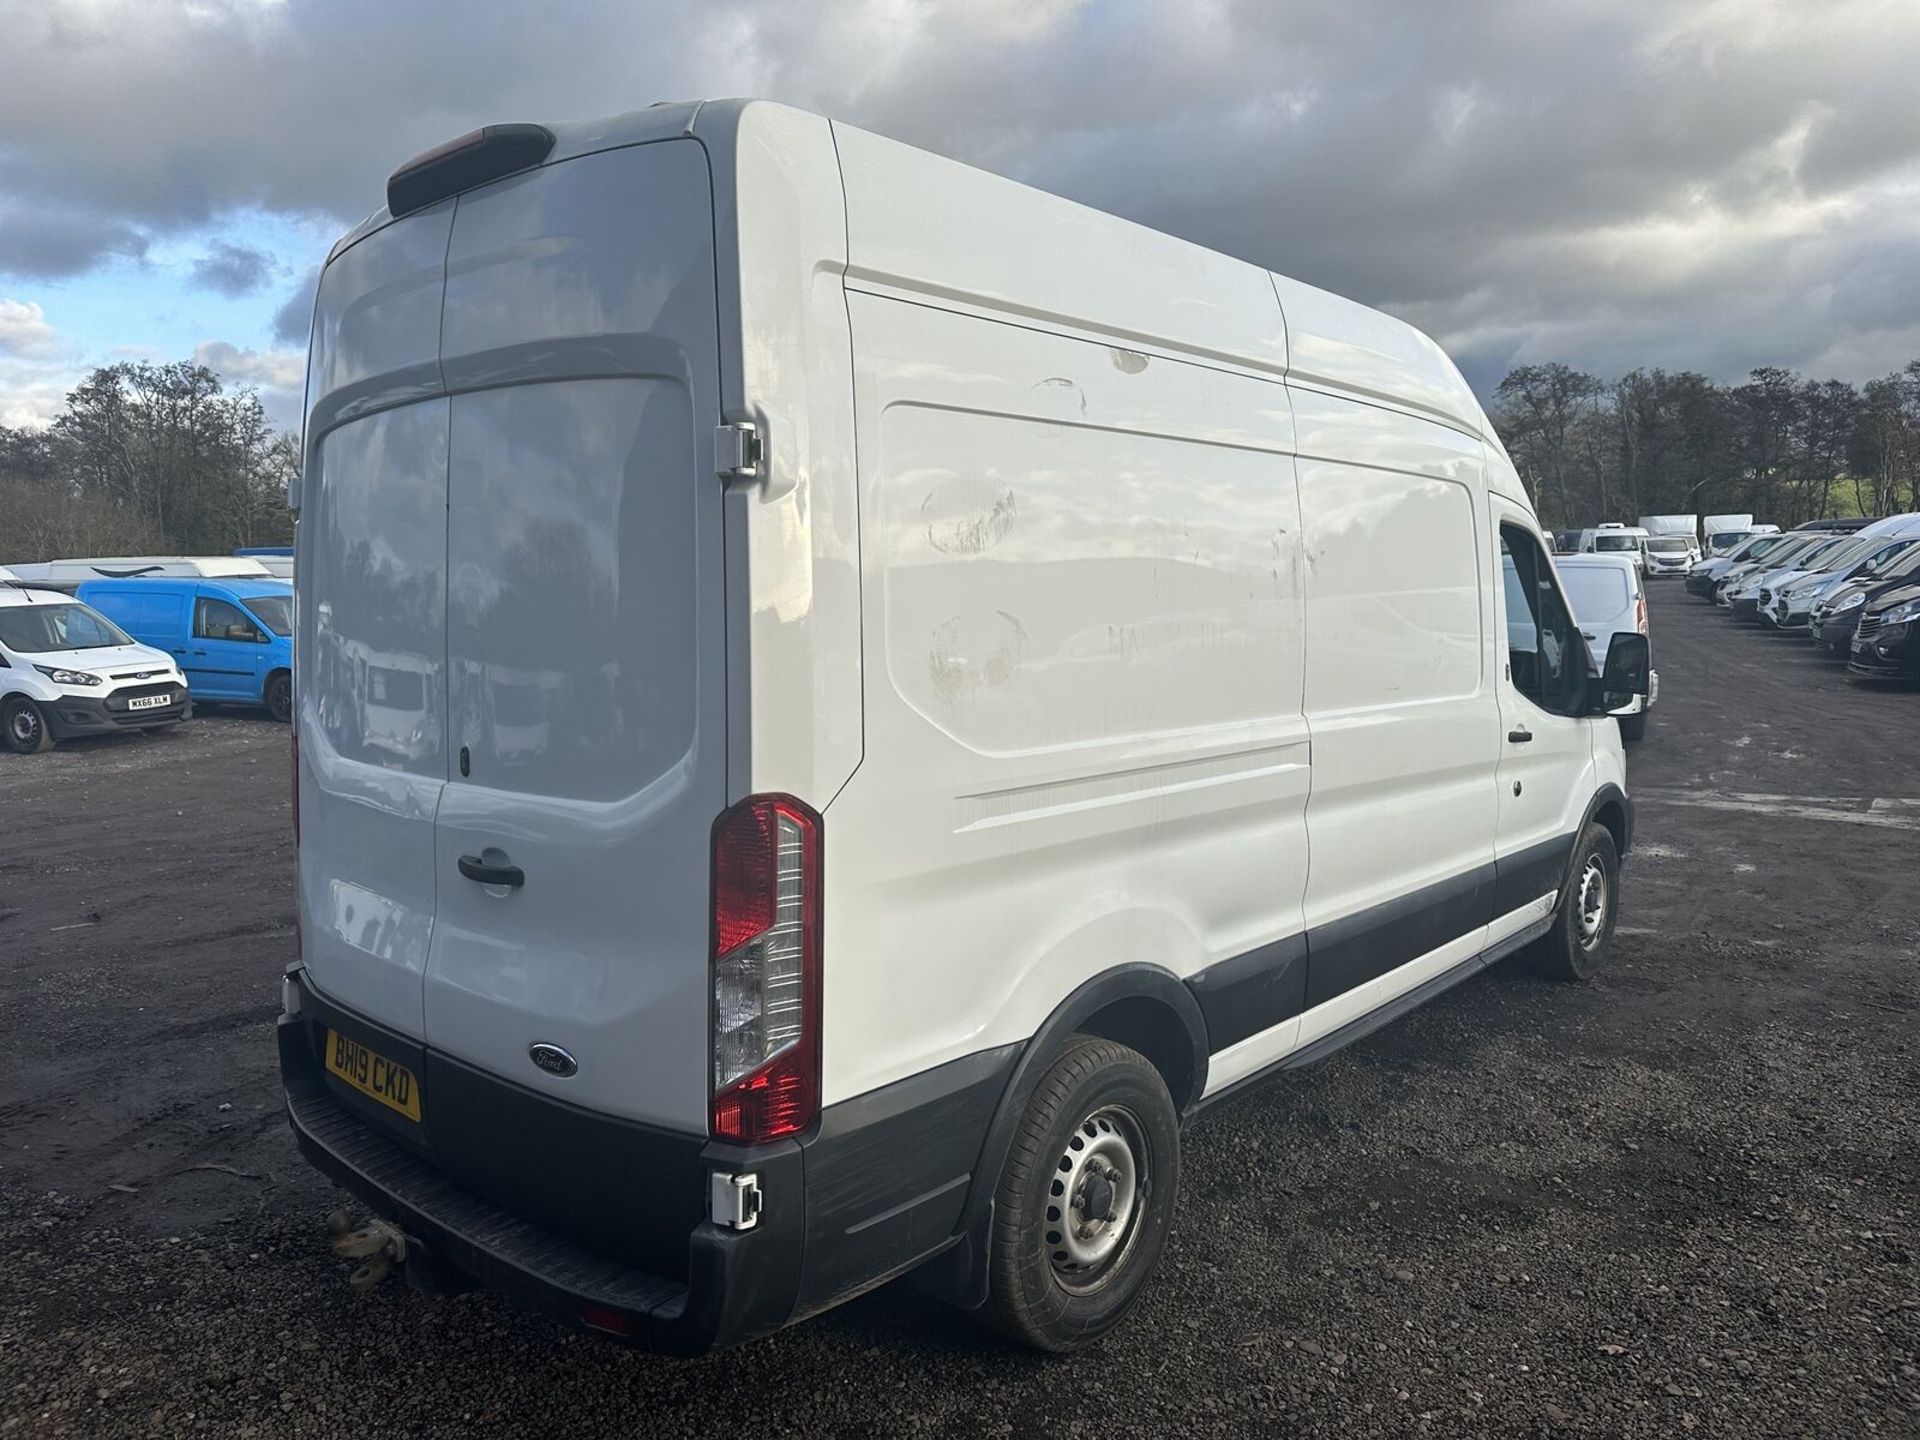 RELIABLE WORKHORSE: 2019 FORD TRANSIT L3 DIESEL, READY FOR DUTY - Image 2 of 15